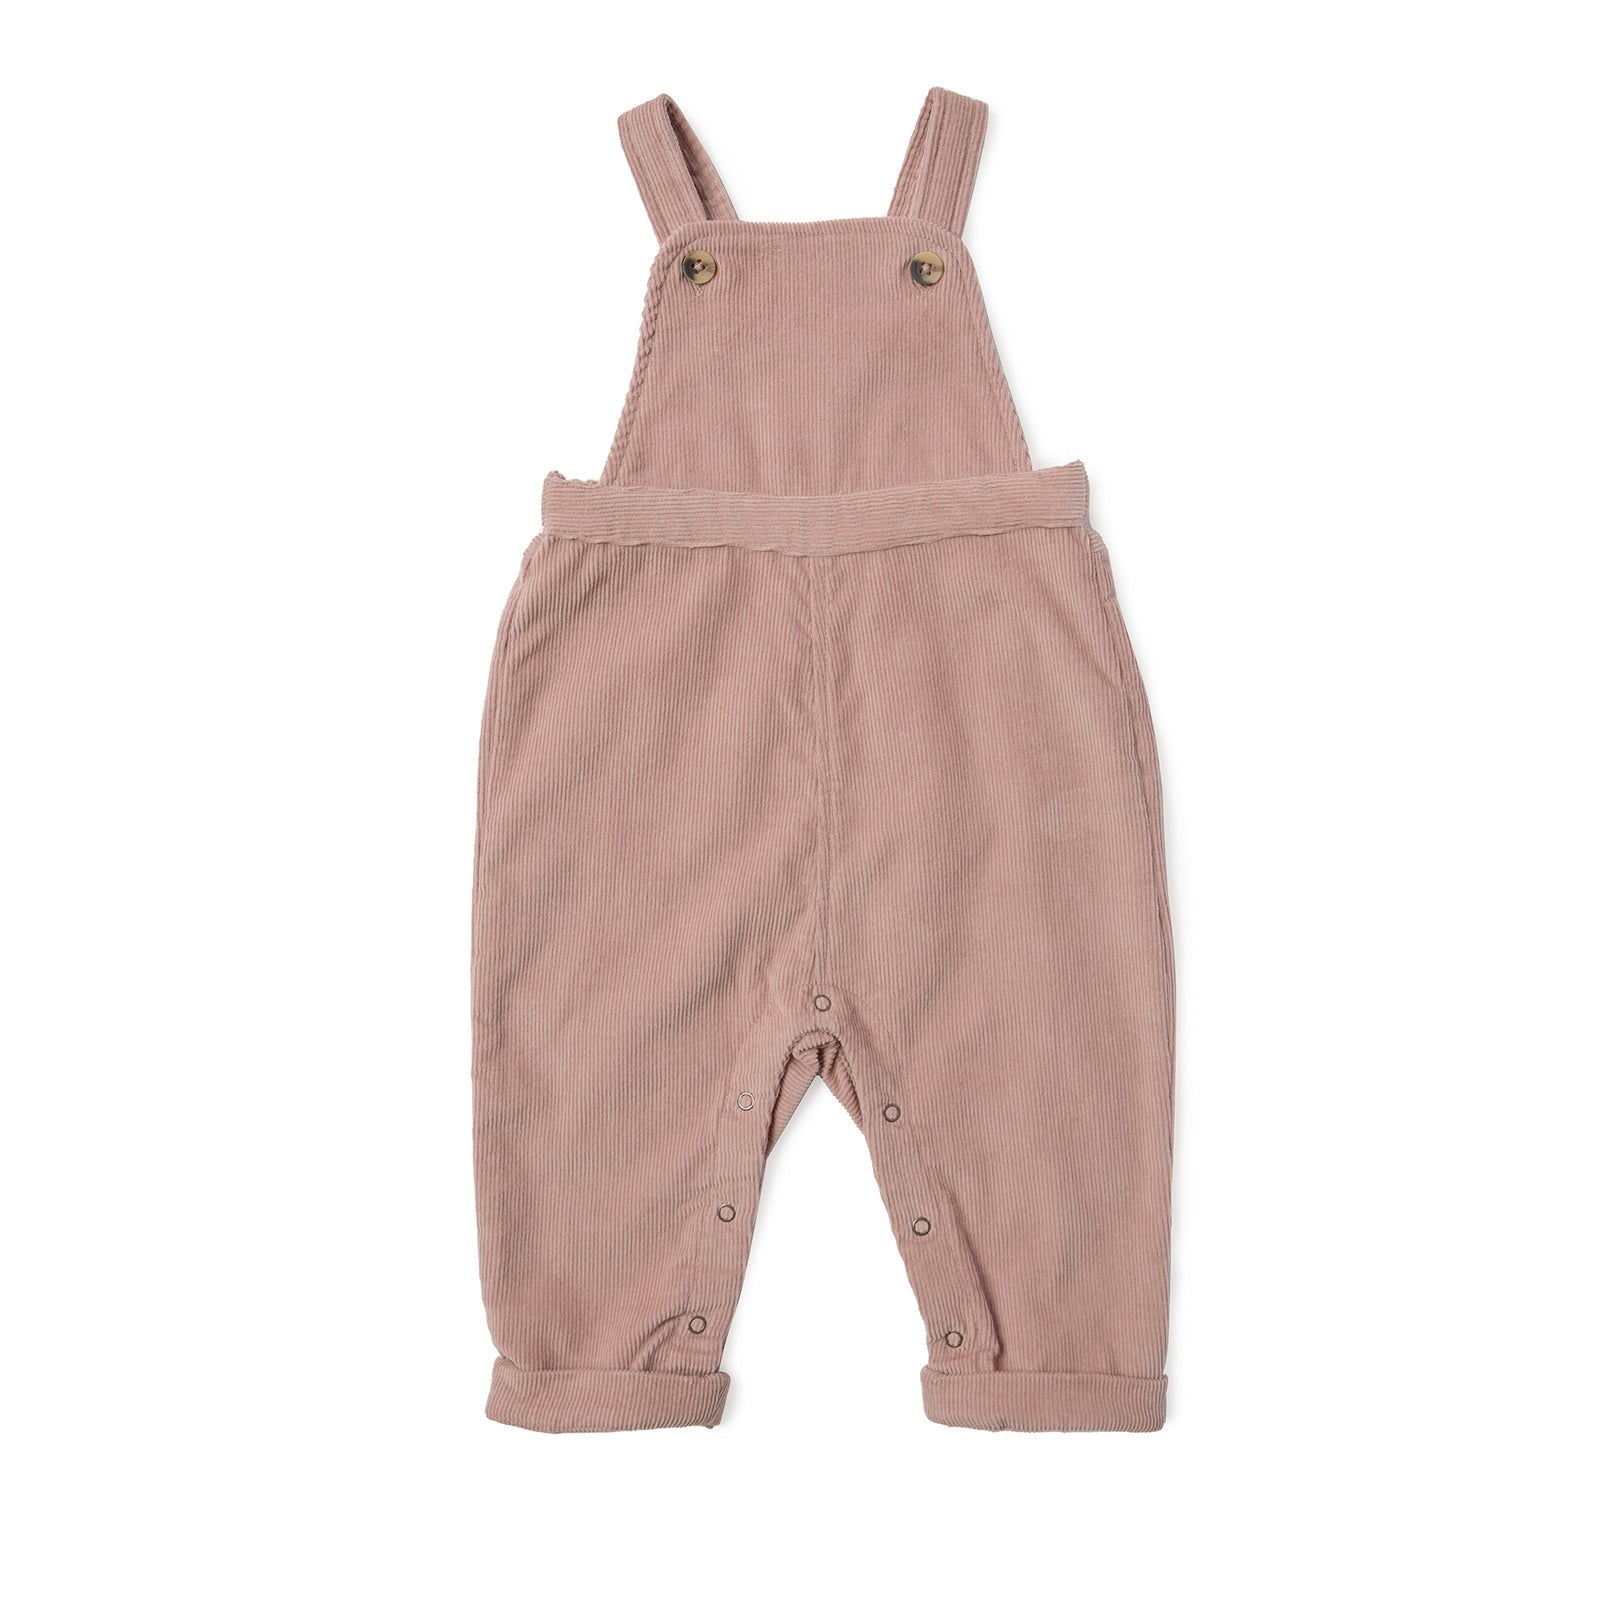 Corduroy Overall Overall Pehr Rose Pink 0 - 3 mos. 